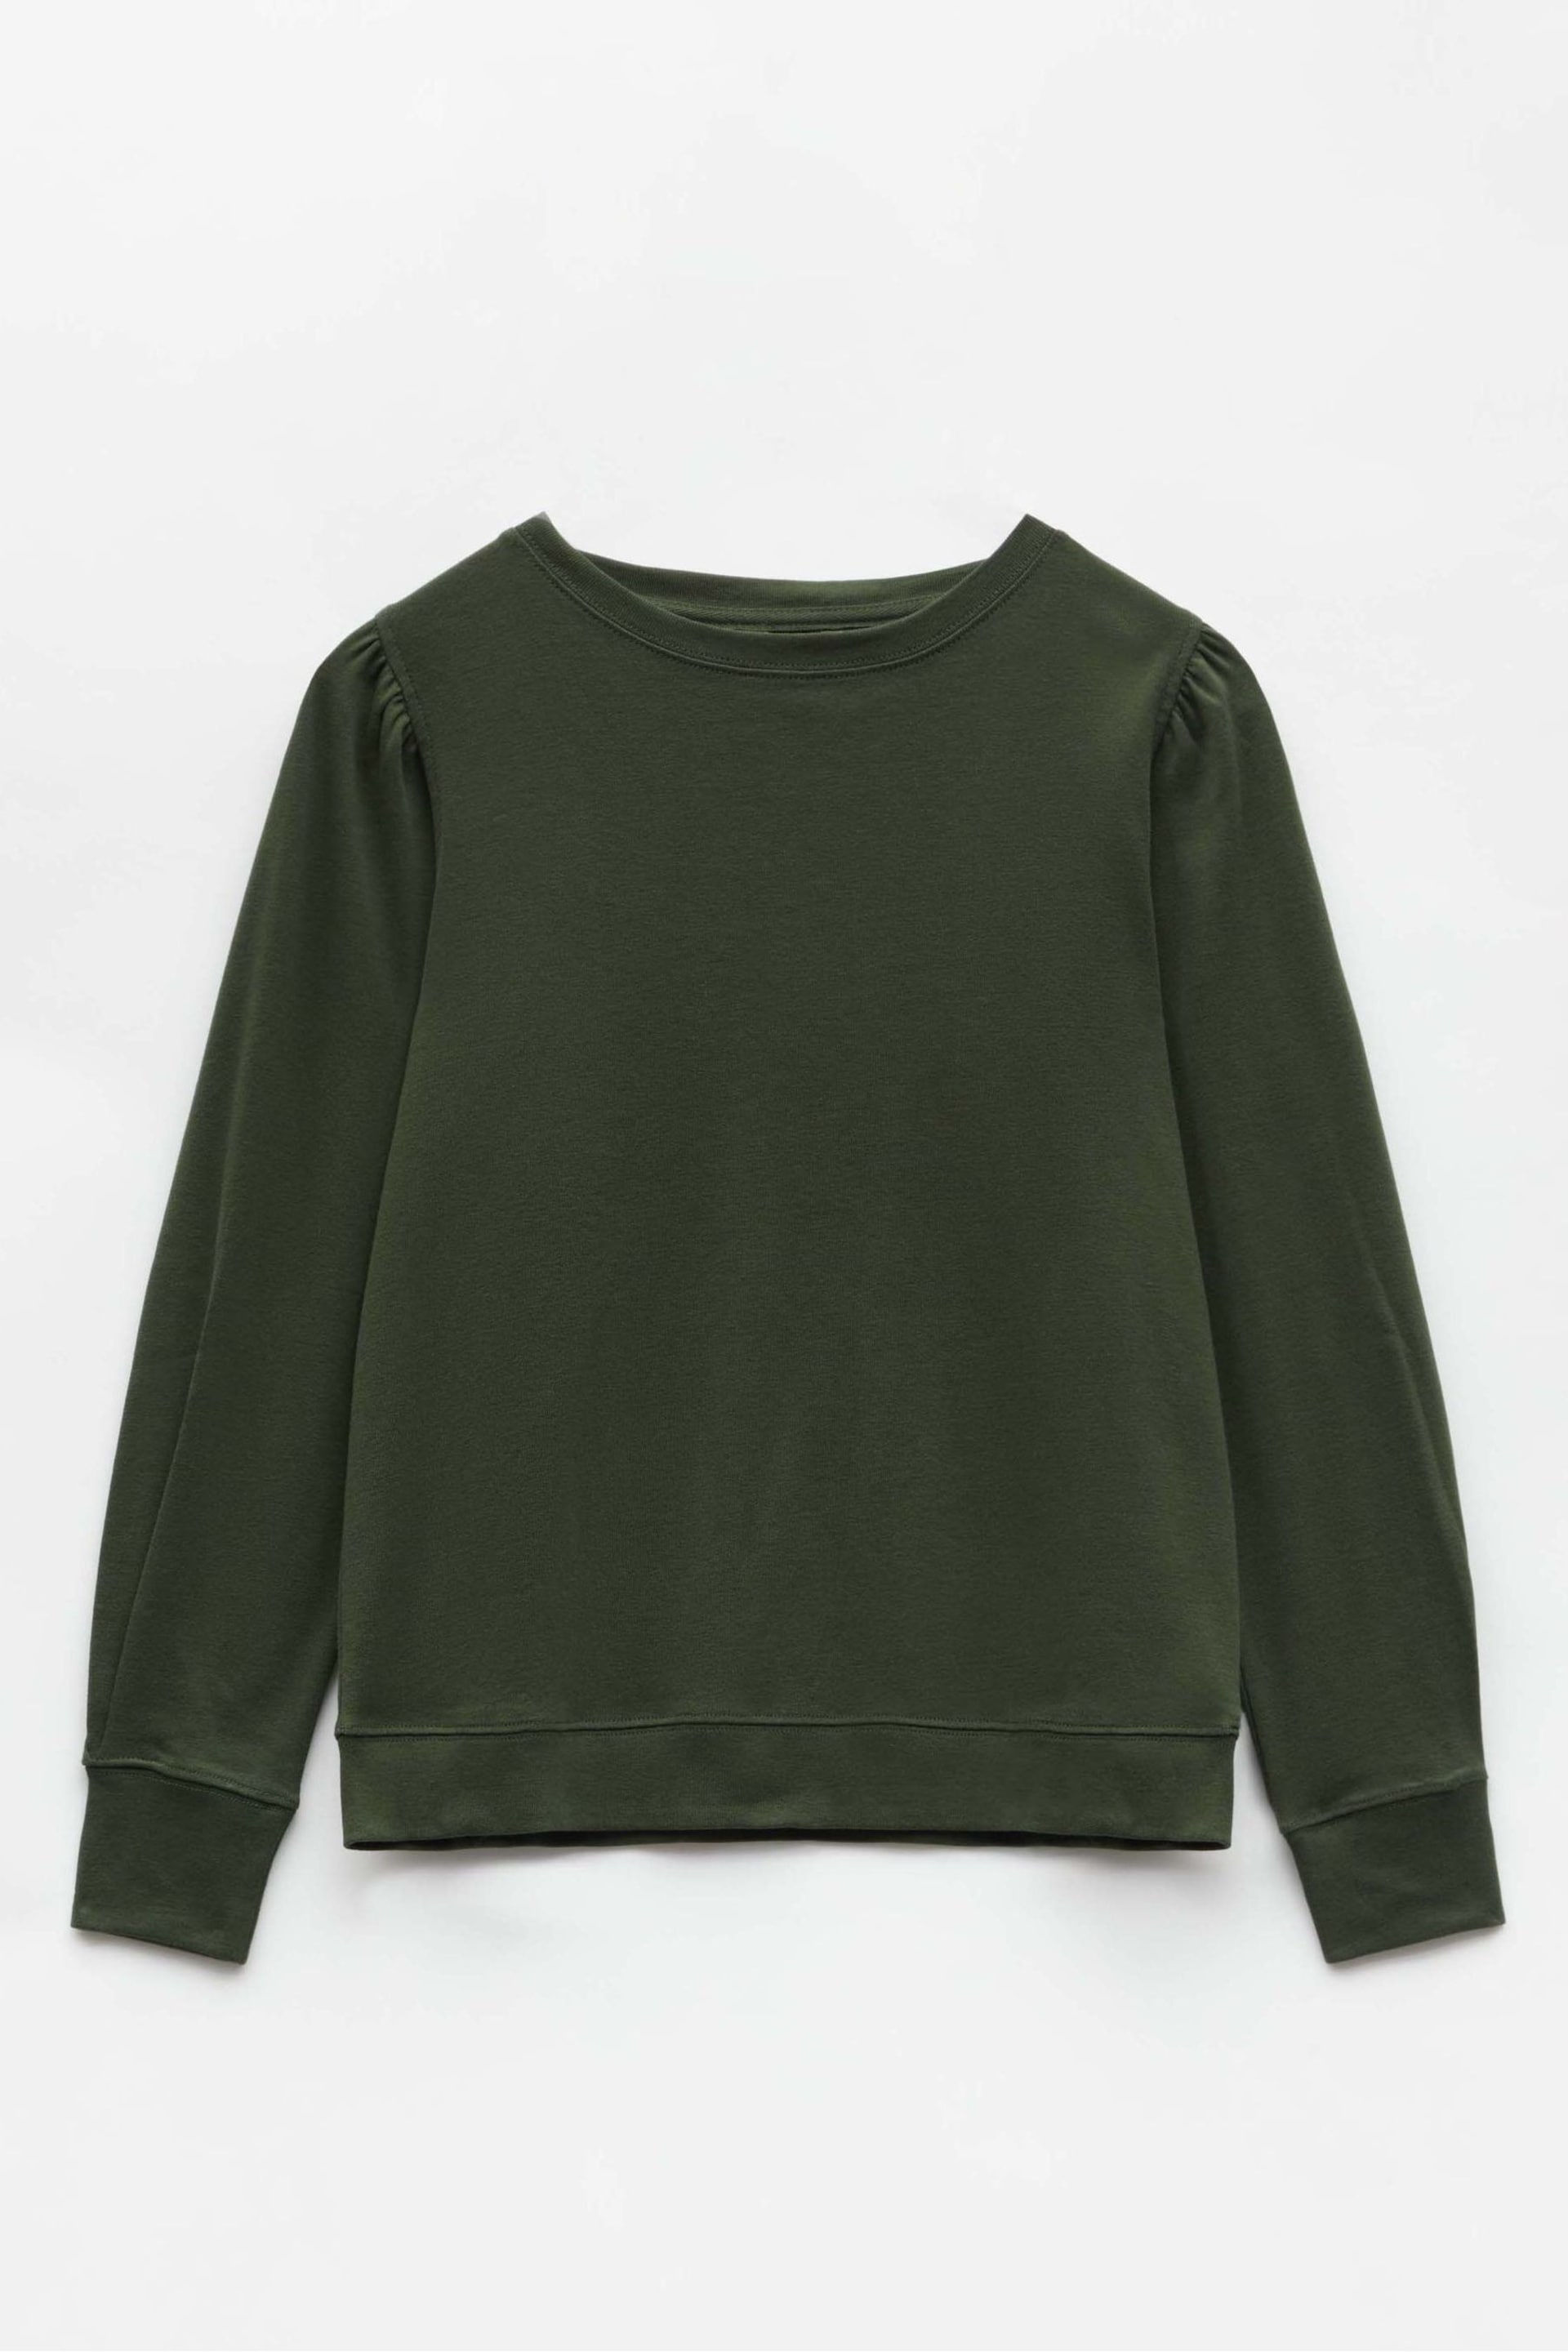 Hush Green Emily Puff Sleeve Jersey Top - Image 5 of 5